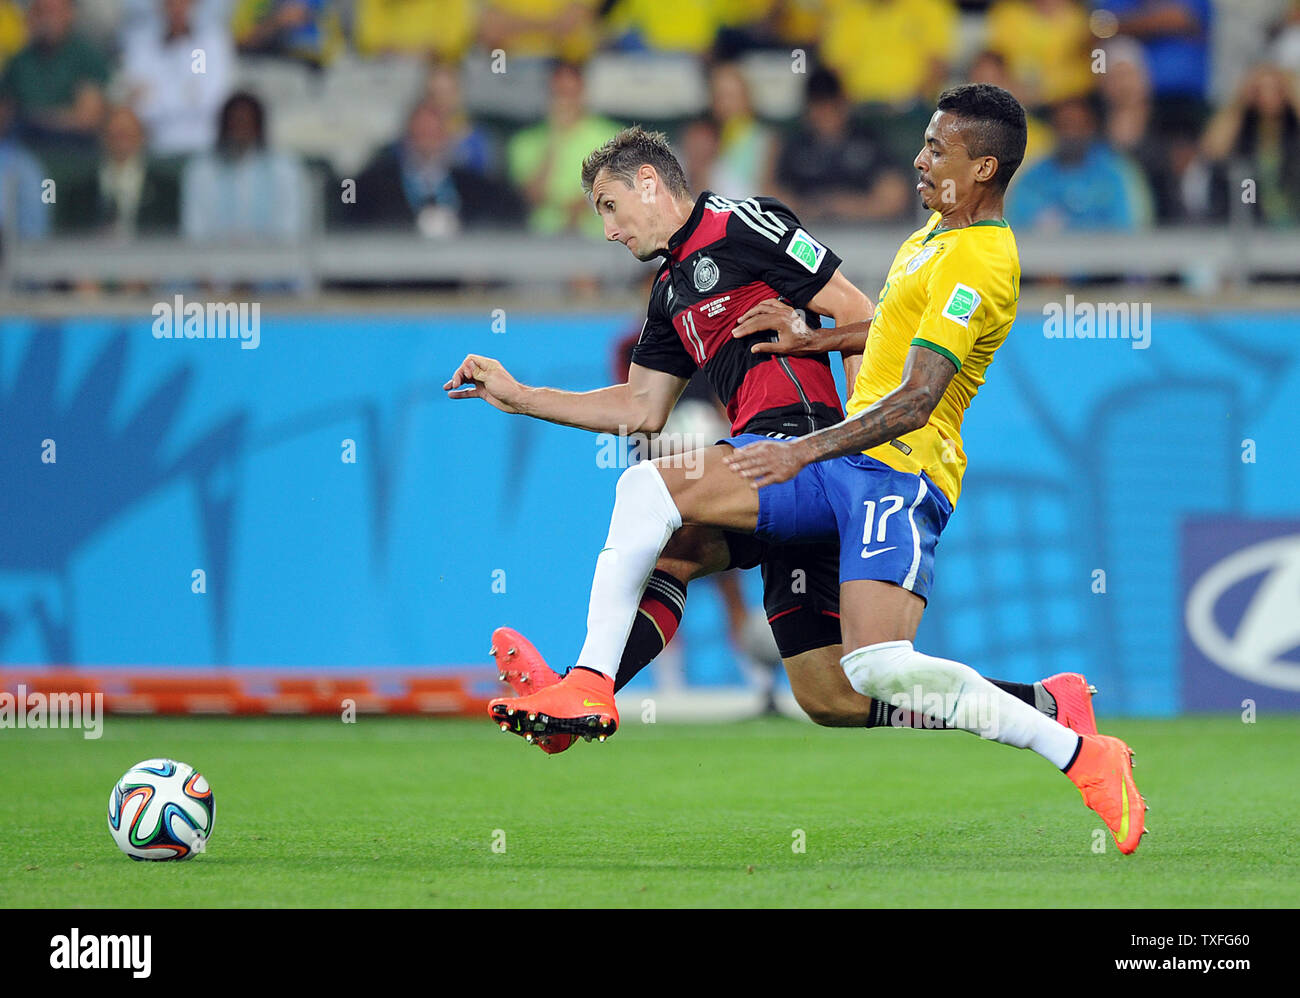 Luis Gustavo of Brazil competes with Miroslav Klose (L) of Germany during the 2014 FIFA World Cup Semi Final match at the Estadio Mineirao in Belo Horizonte, Brazil on July 08, 2014. UPI/Chris Brunskill Stock Photo